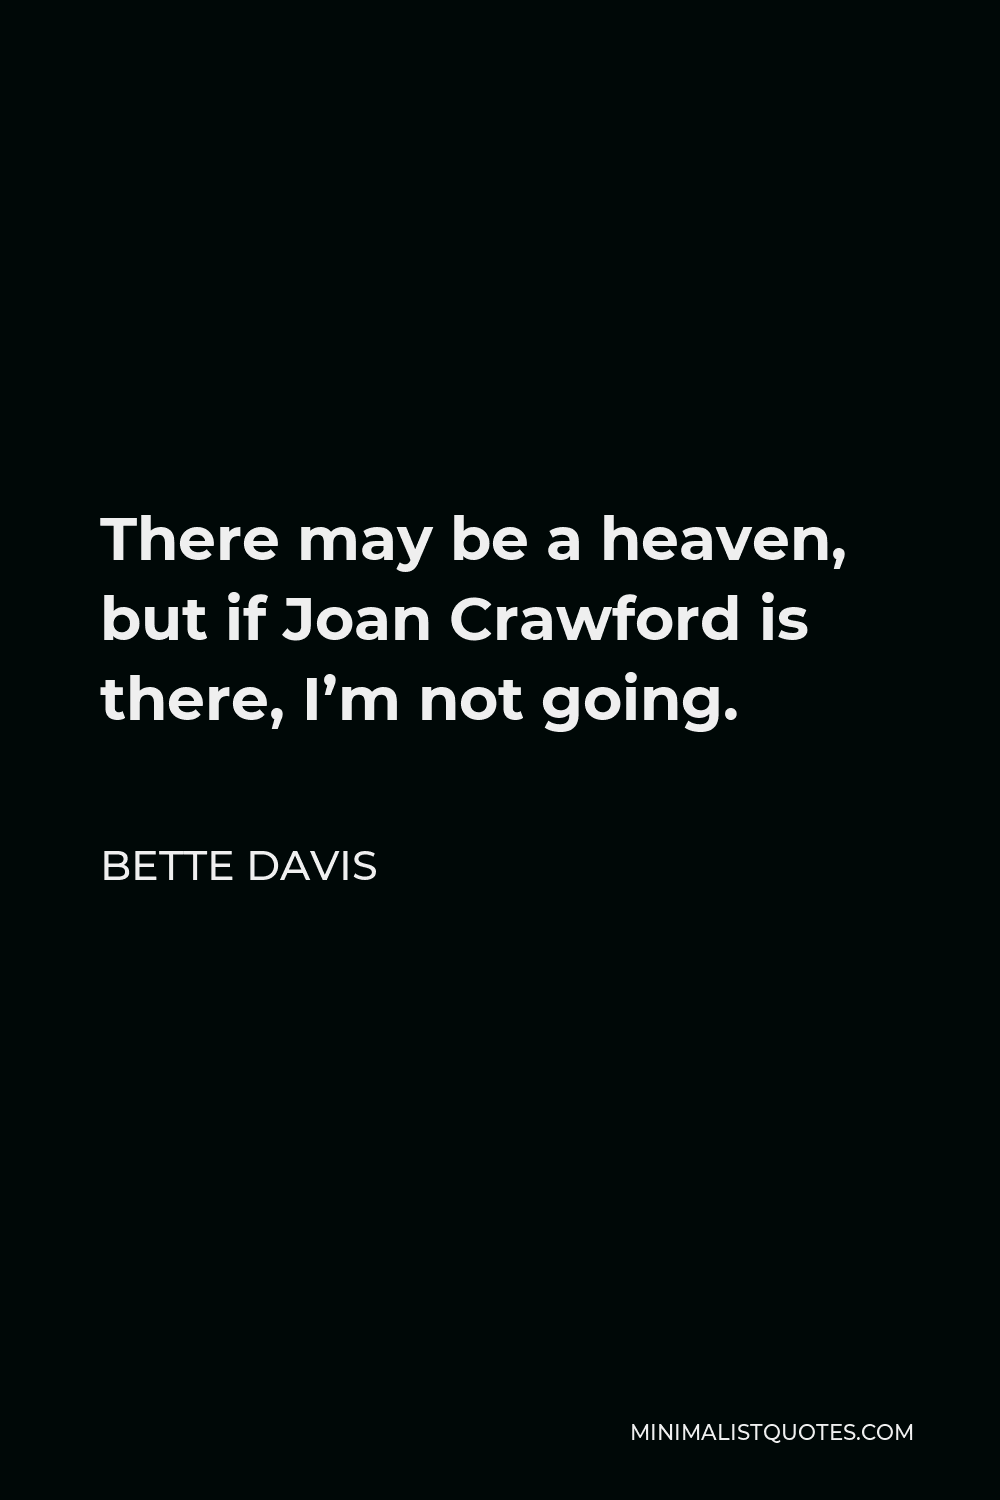 Bette Davis Quote - There may be a heaven, but if Joan Crawford is there, I’m not going.